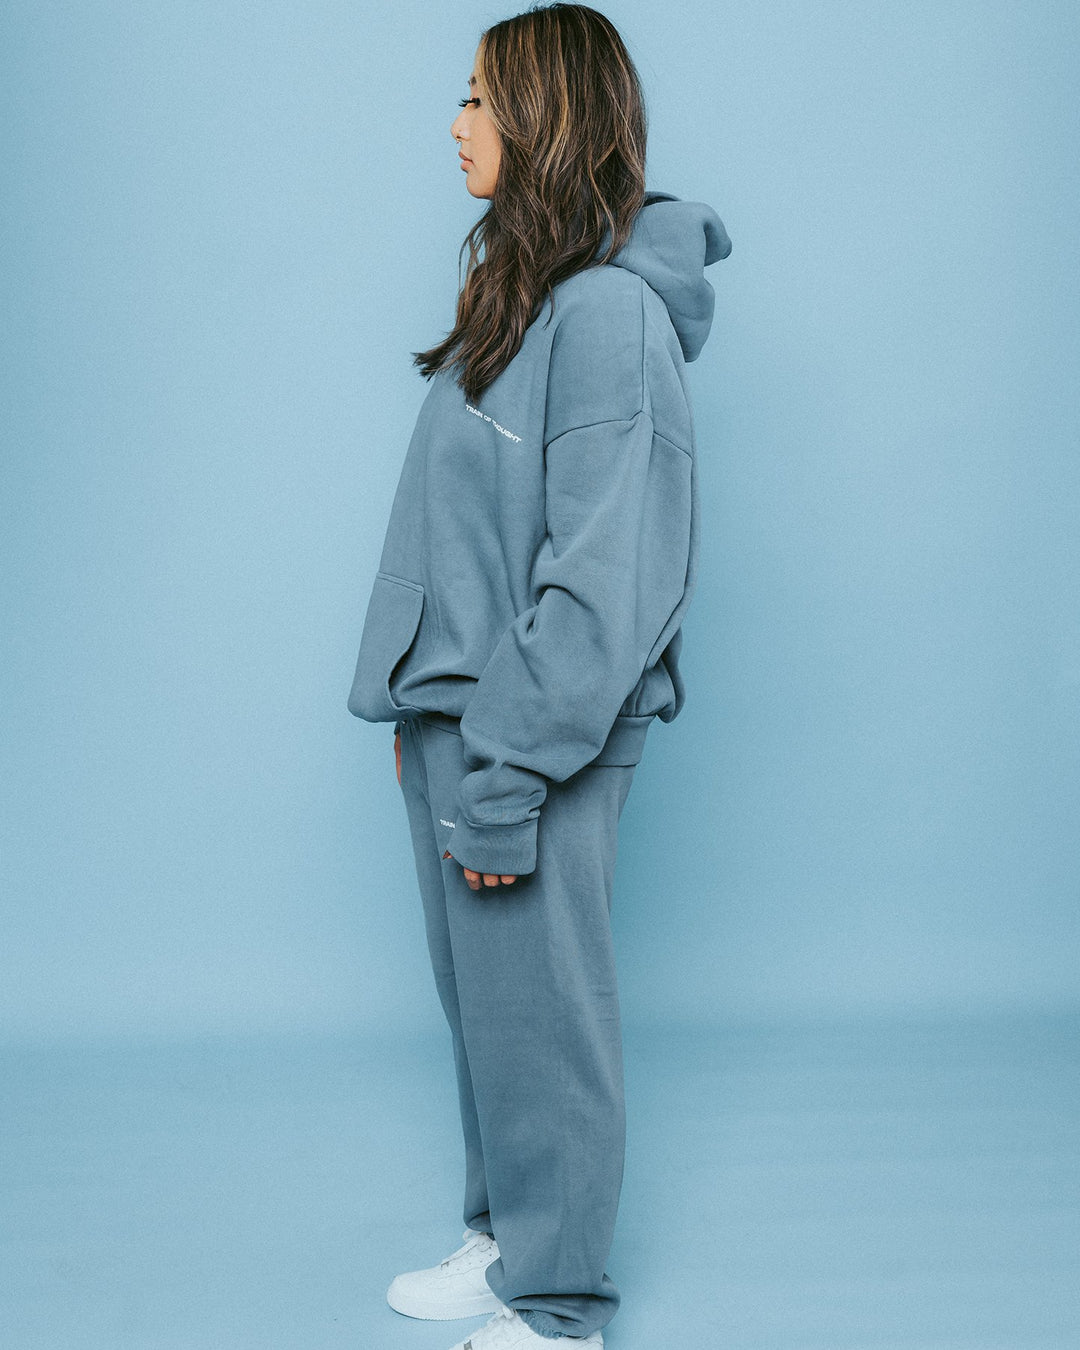 Necessary Lounge Pebble Blue Sweatpants - trainofthoughtcollective